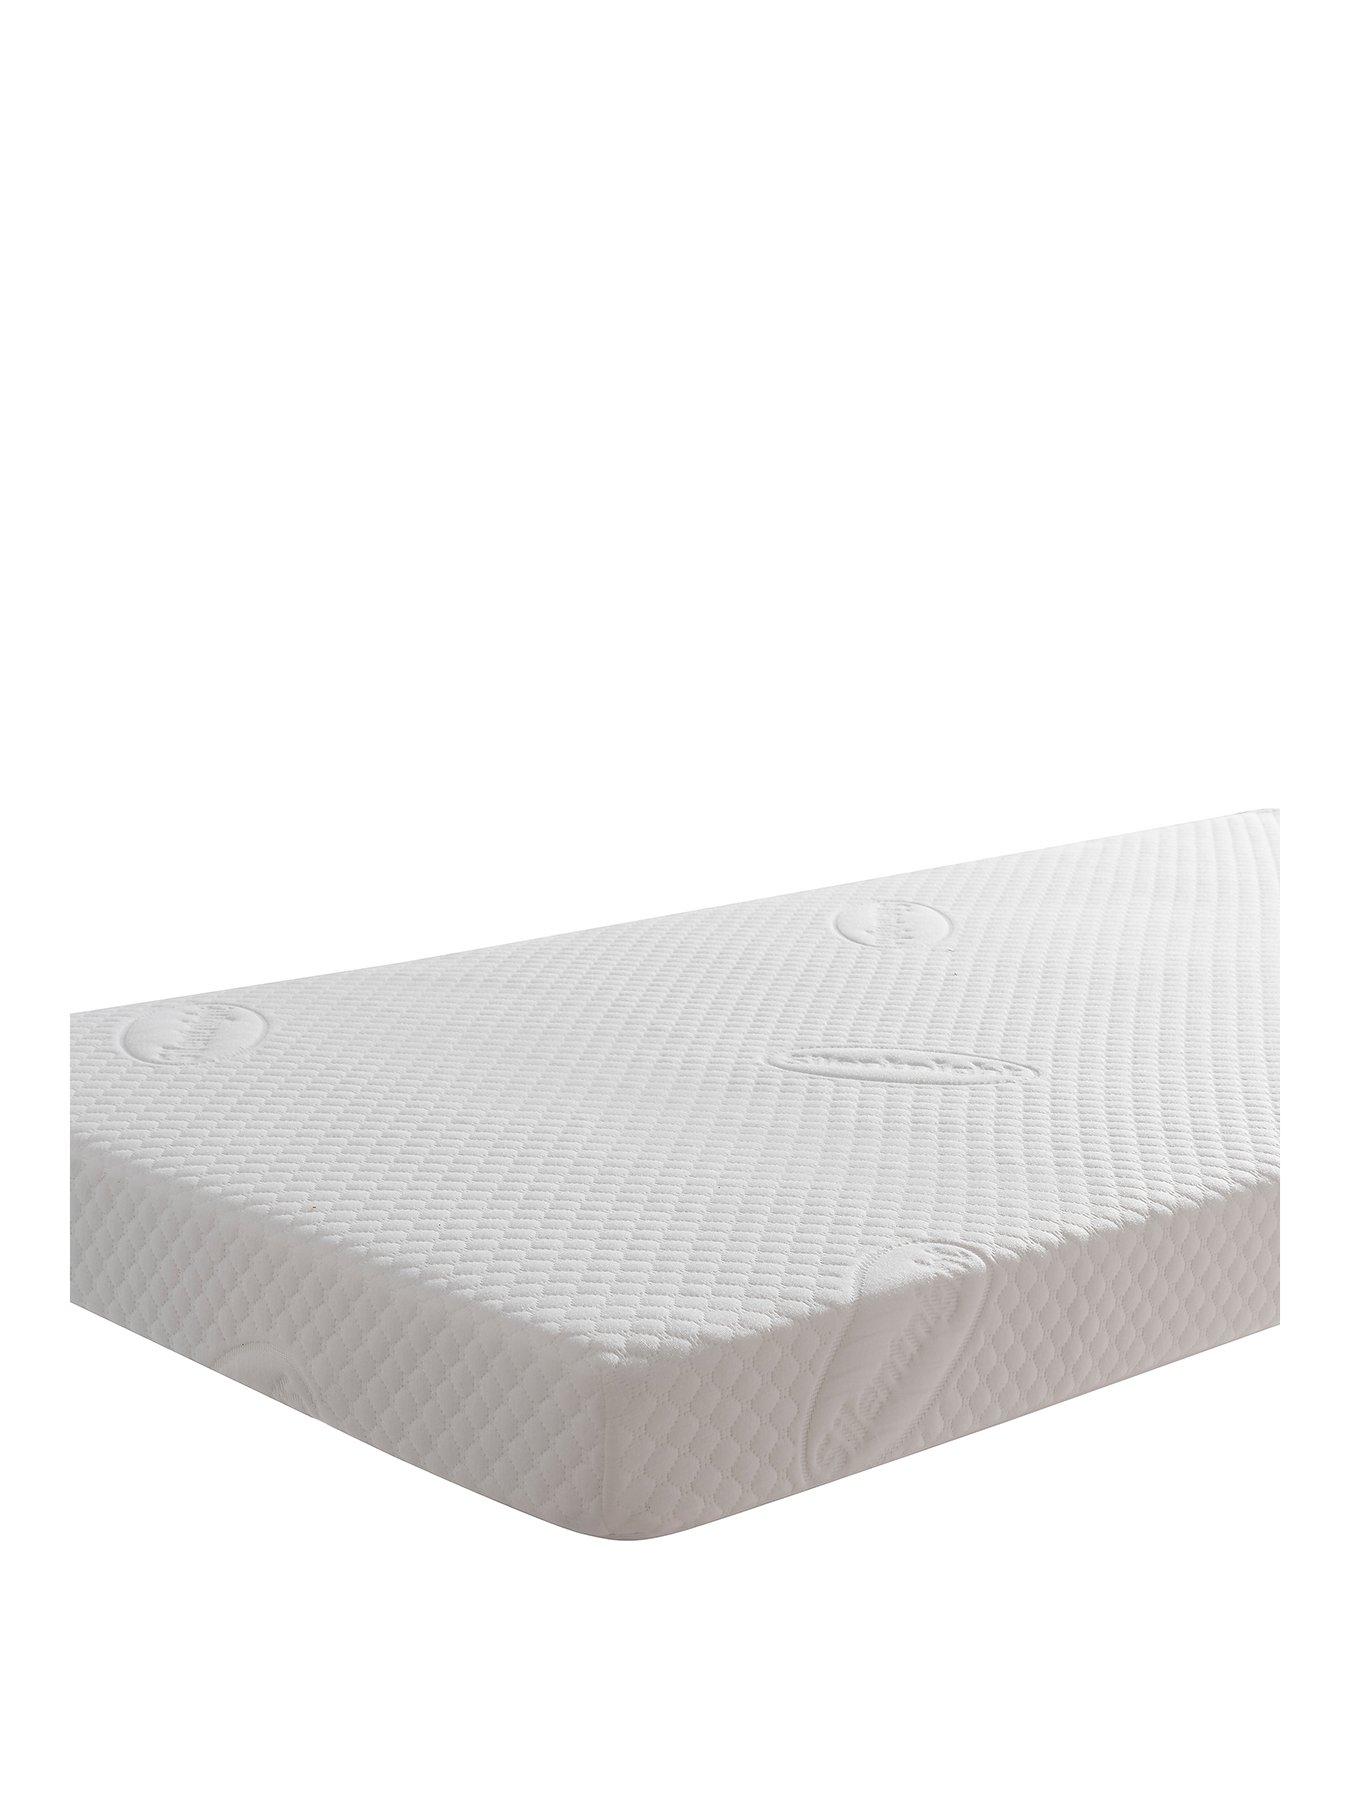 cot bed pillow silent night